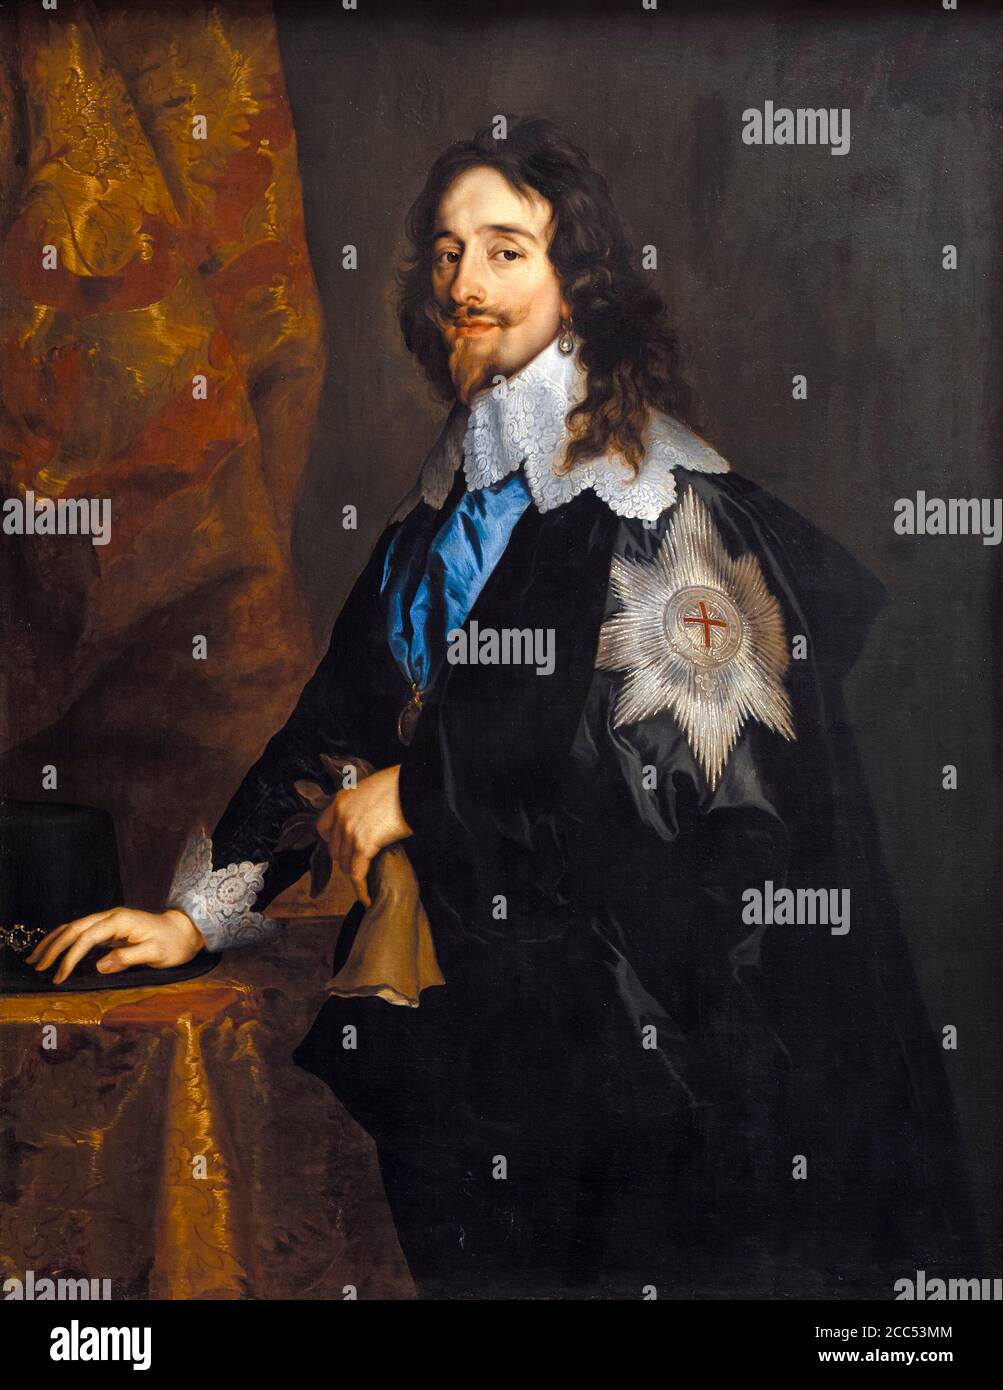 Re Carlo i d'Inghilterra (1600-1649), ritratto di Anthony van Dyck, 1614-1641 Foto Stock